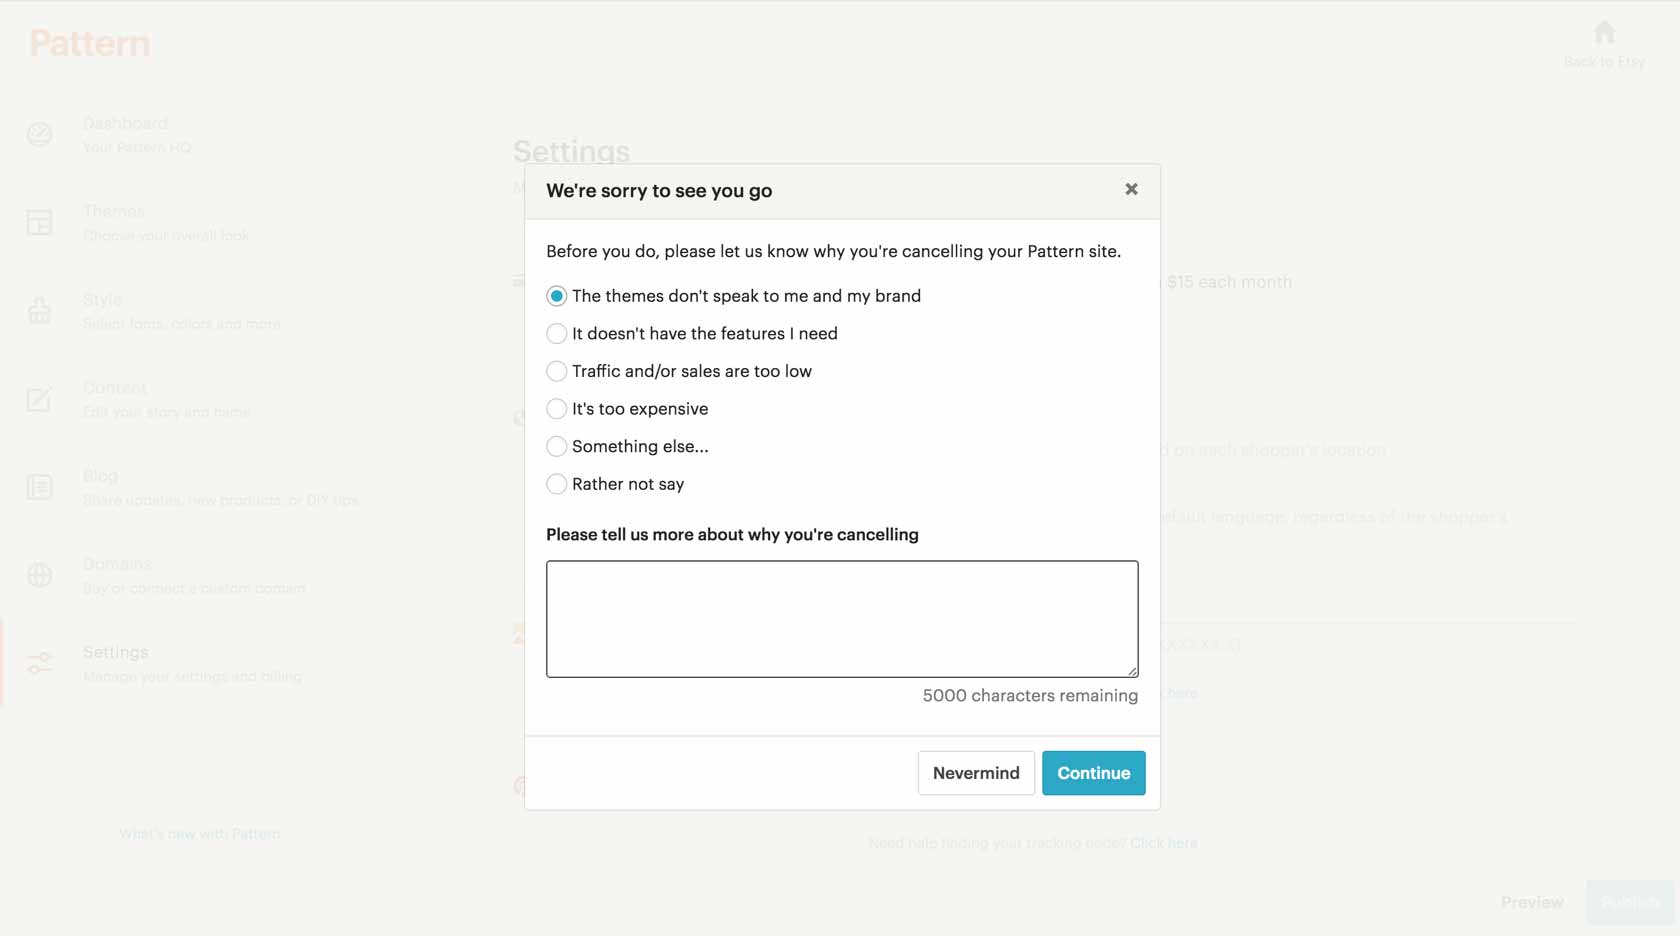 Screenshot of website asking for feedback after user cancels free trial